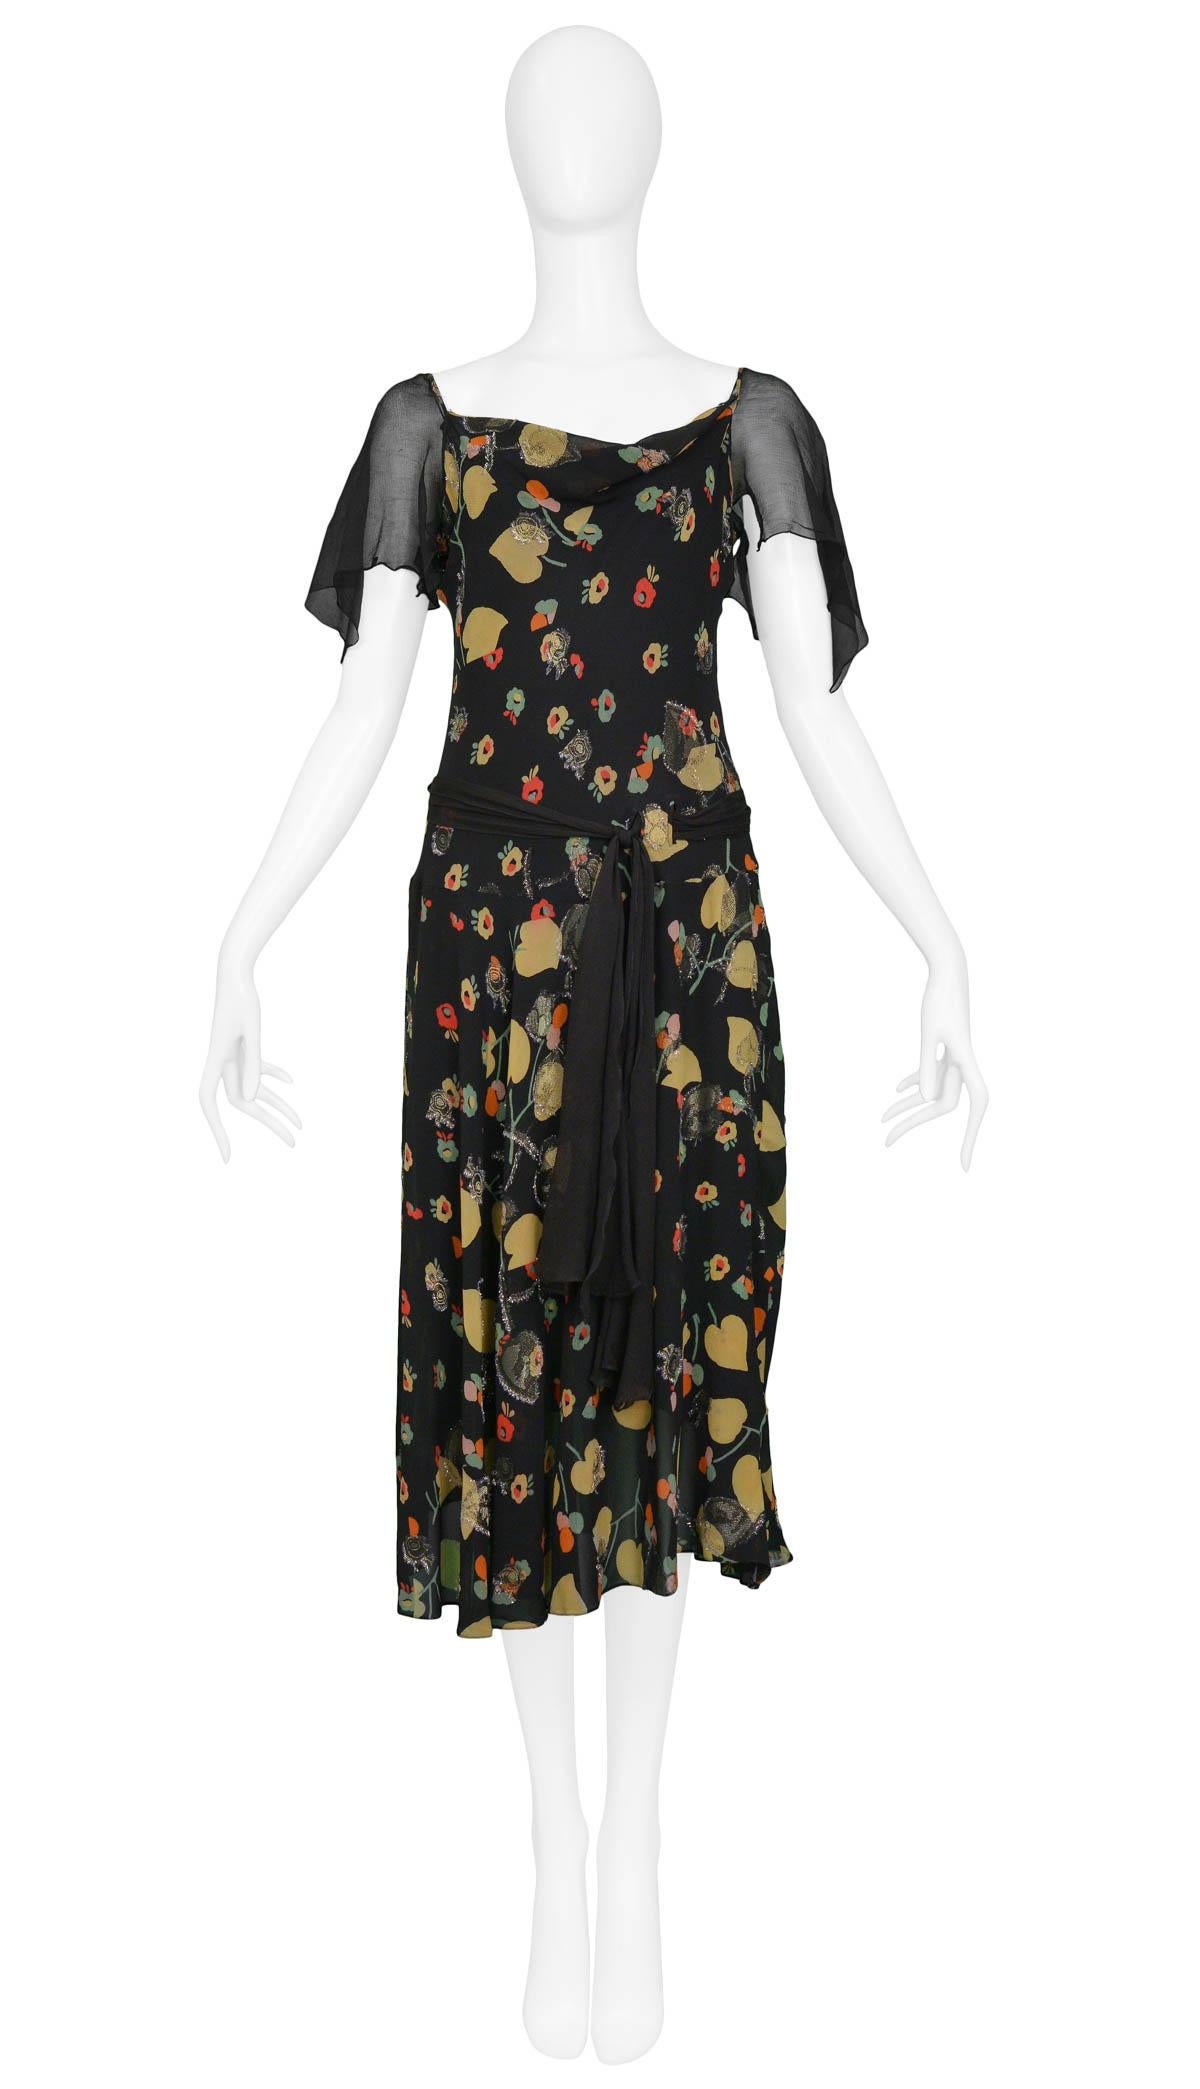 Vintage Chanel black chiffon and floral 1930s inspired tea dress with flutter sleeves, waist sash & gold lurex threading throughout. 

Excellent Condition.

Size: 2/4